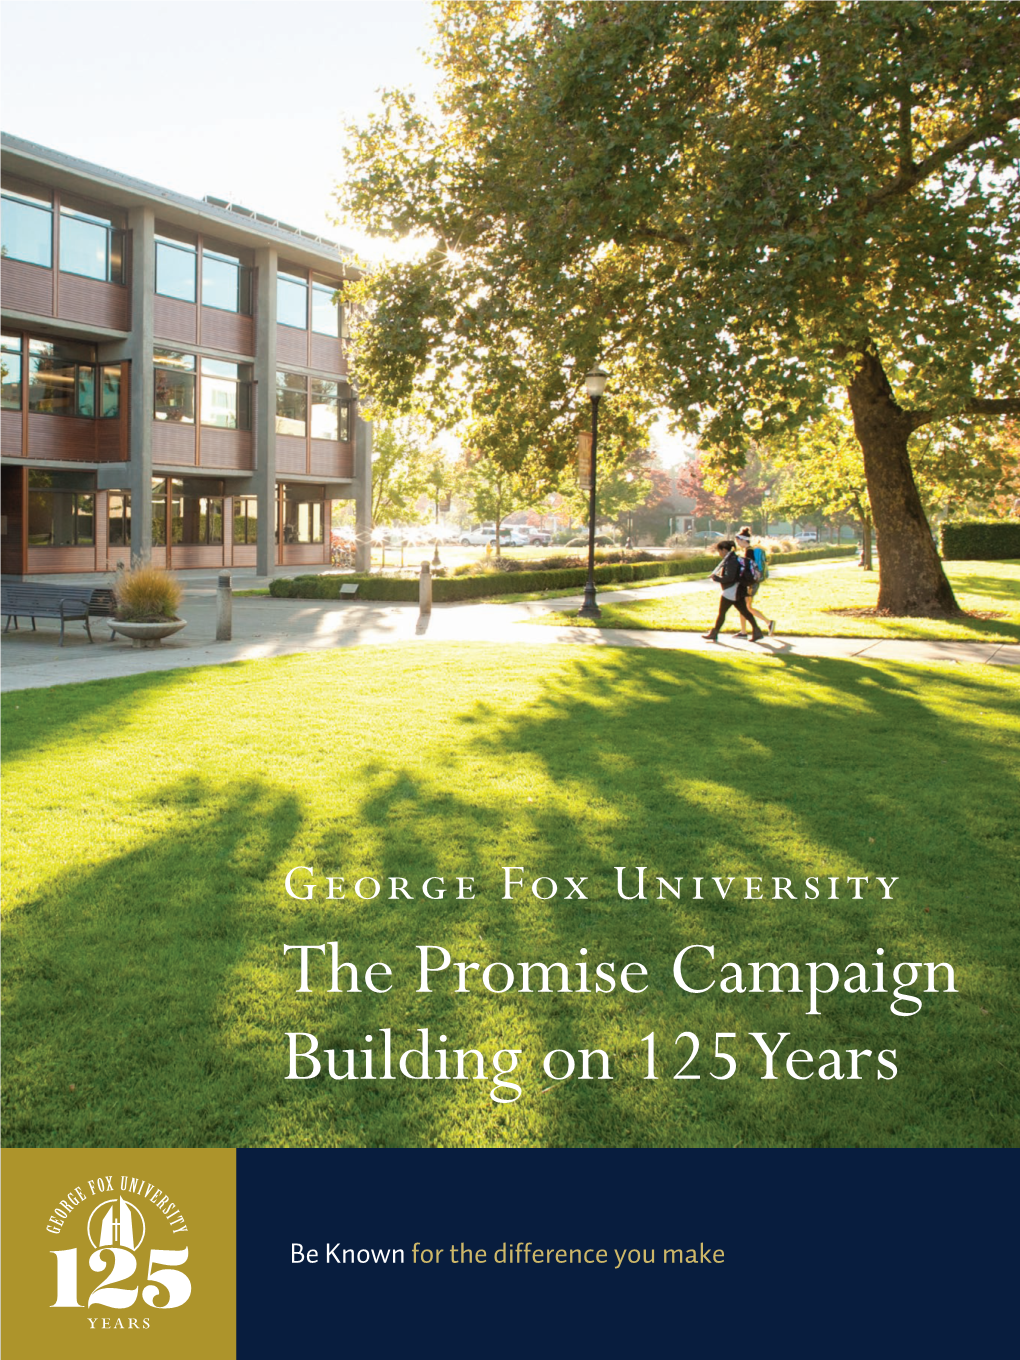 George Fox University the Promise Campaign Building on 125 Years